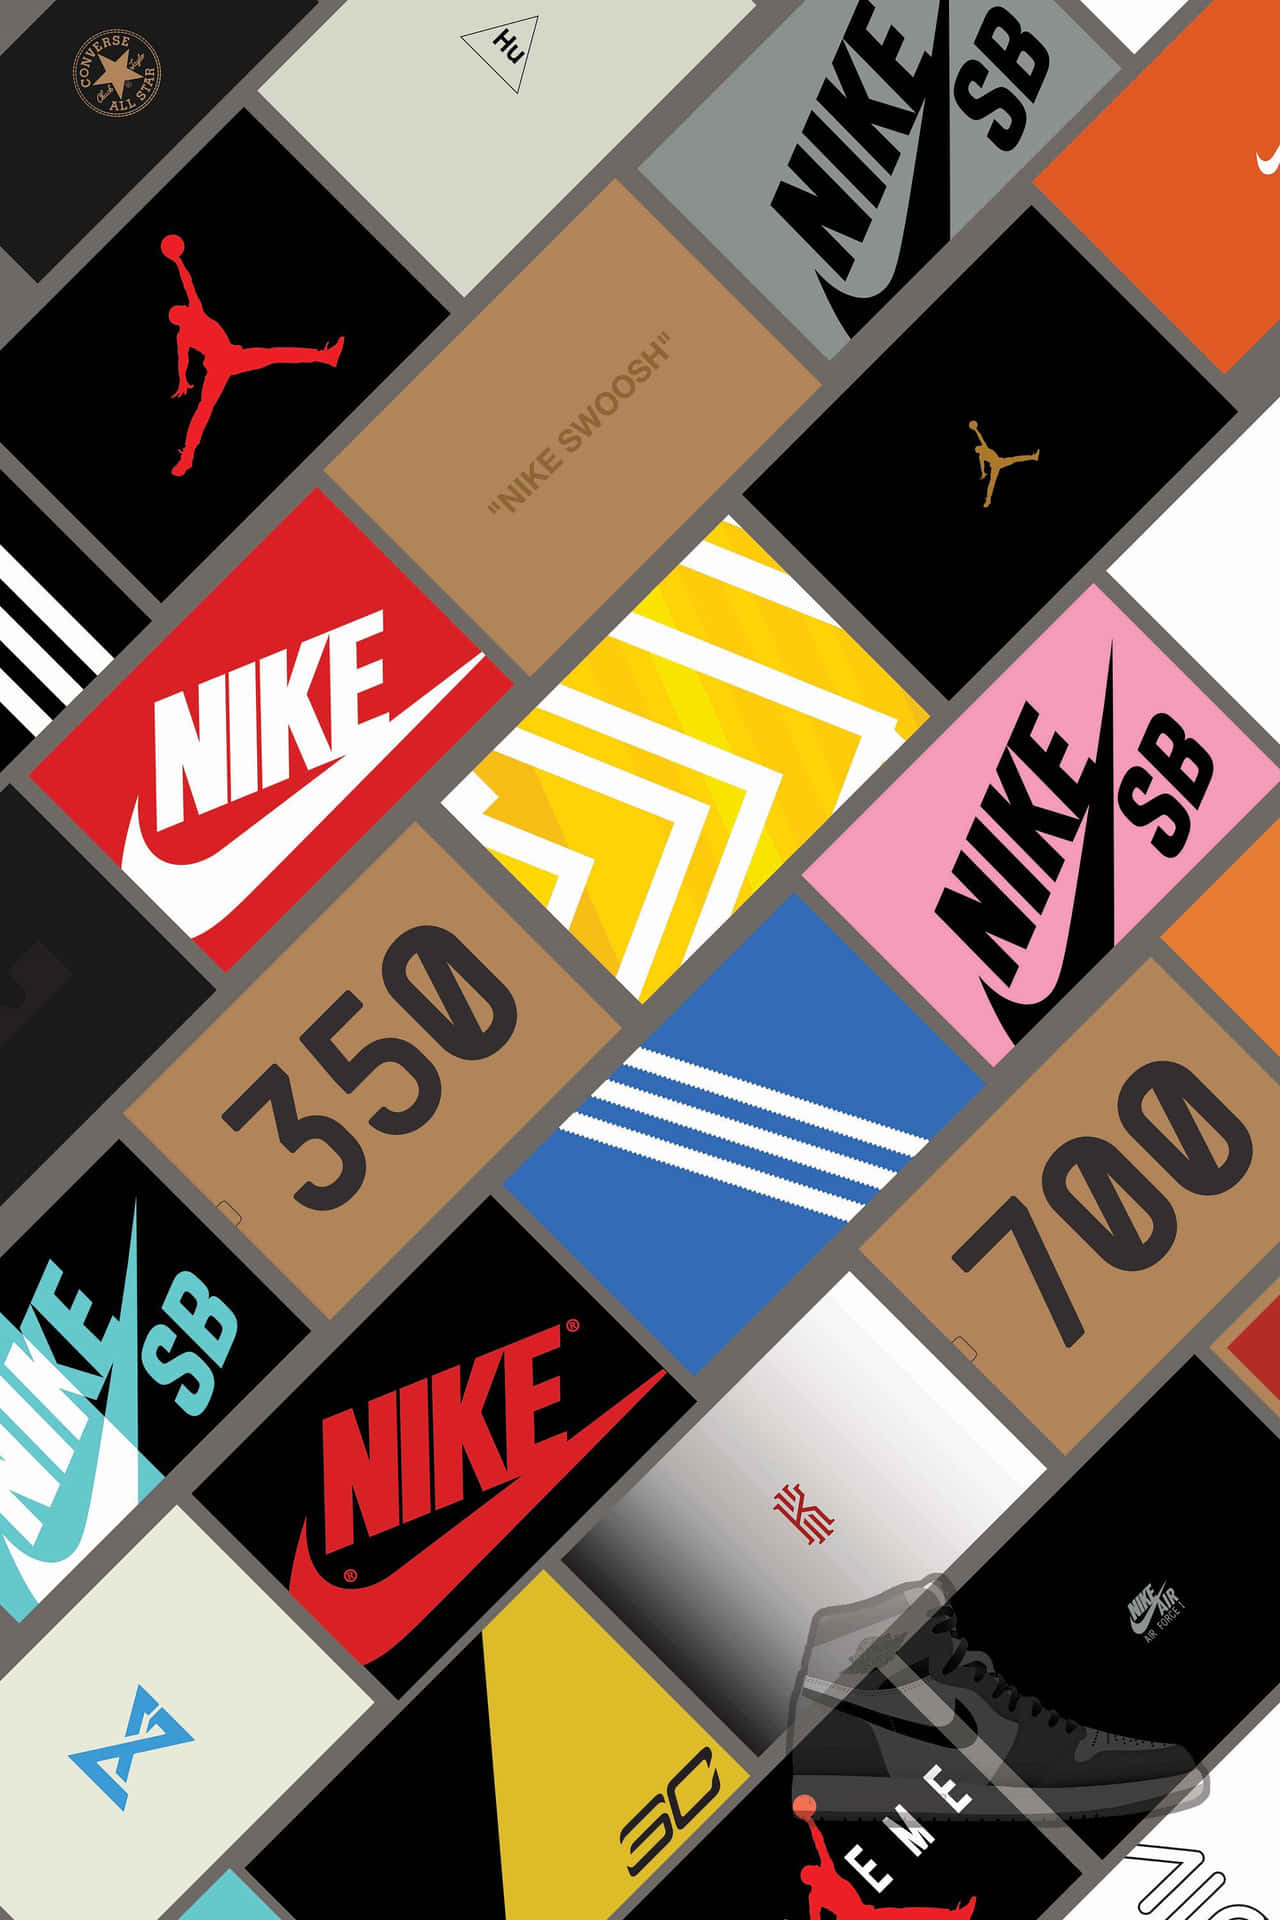 Nike Logos In Different Colors And Sizes Wallpaper